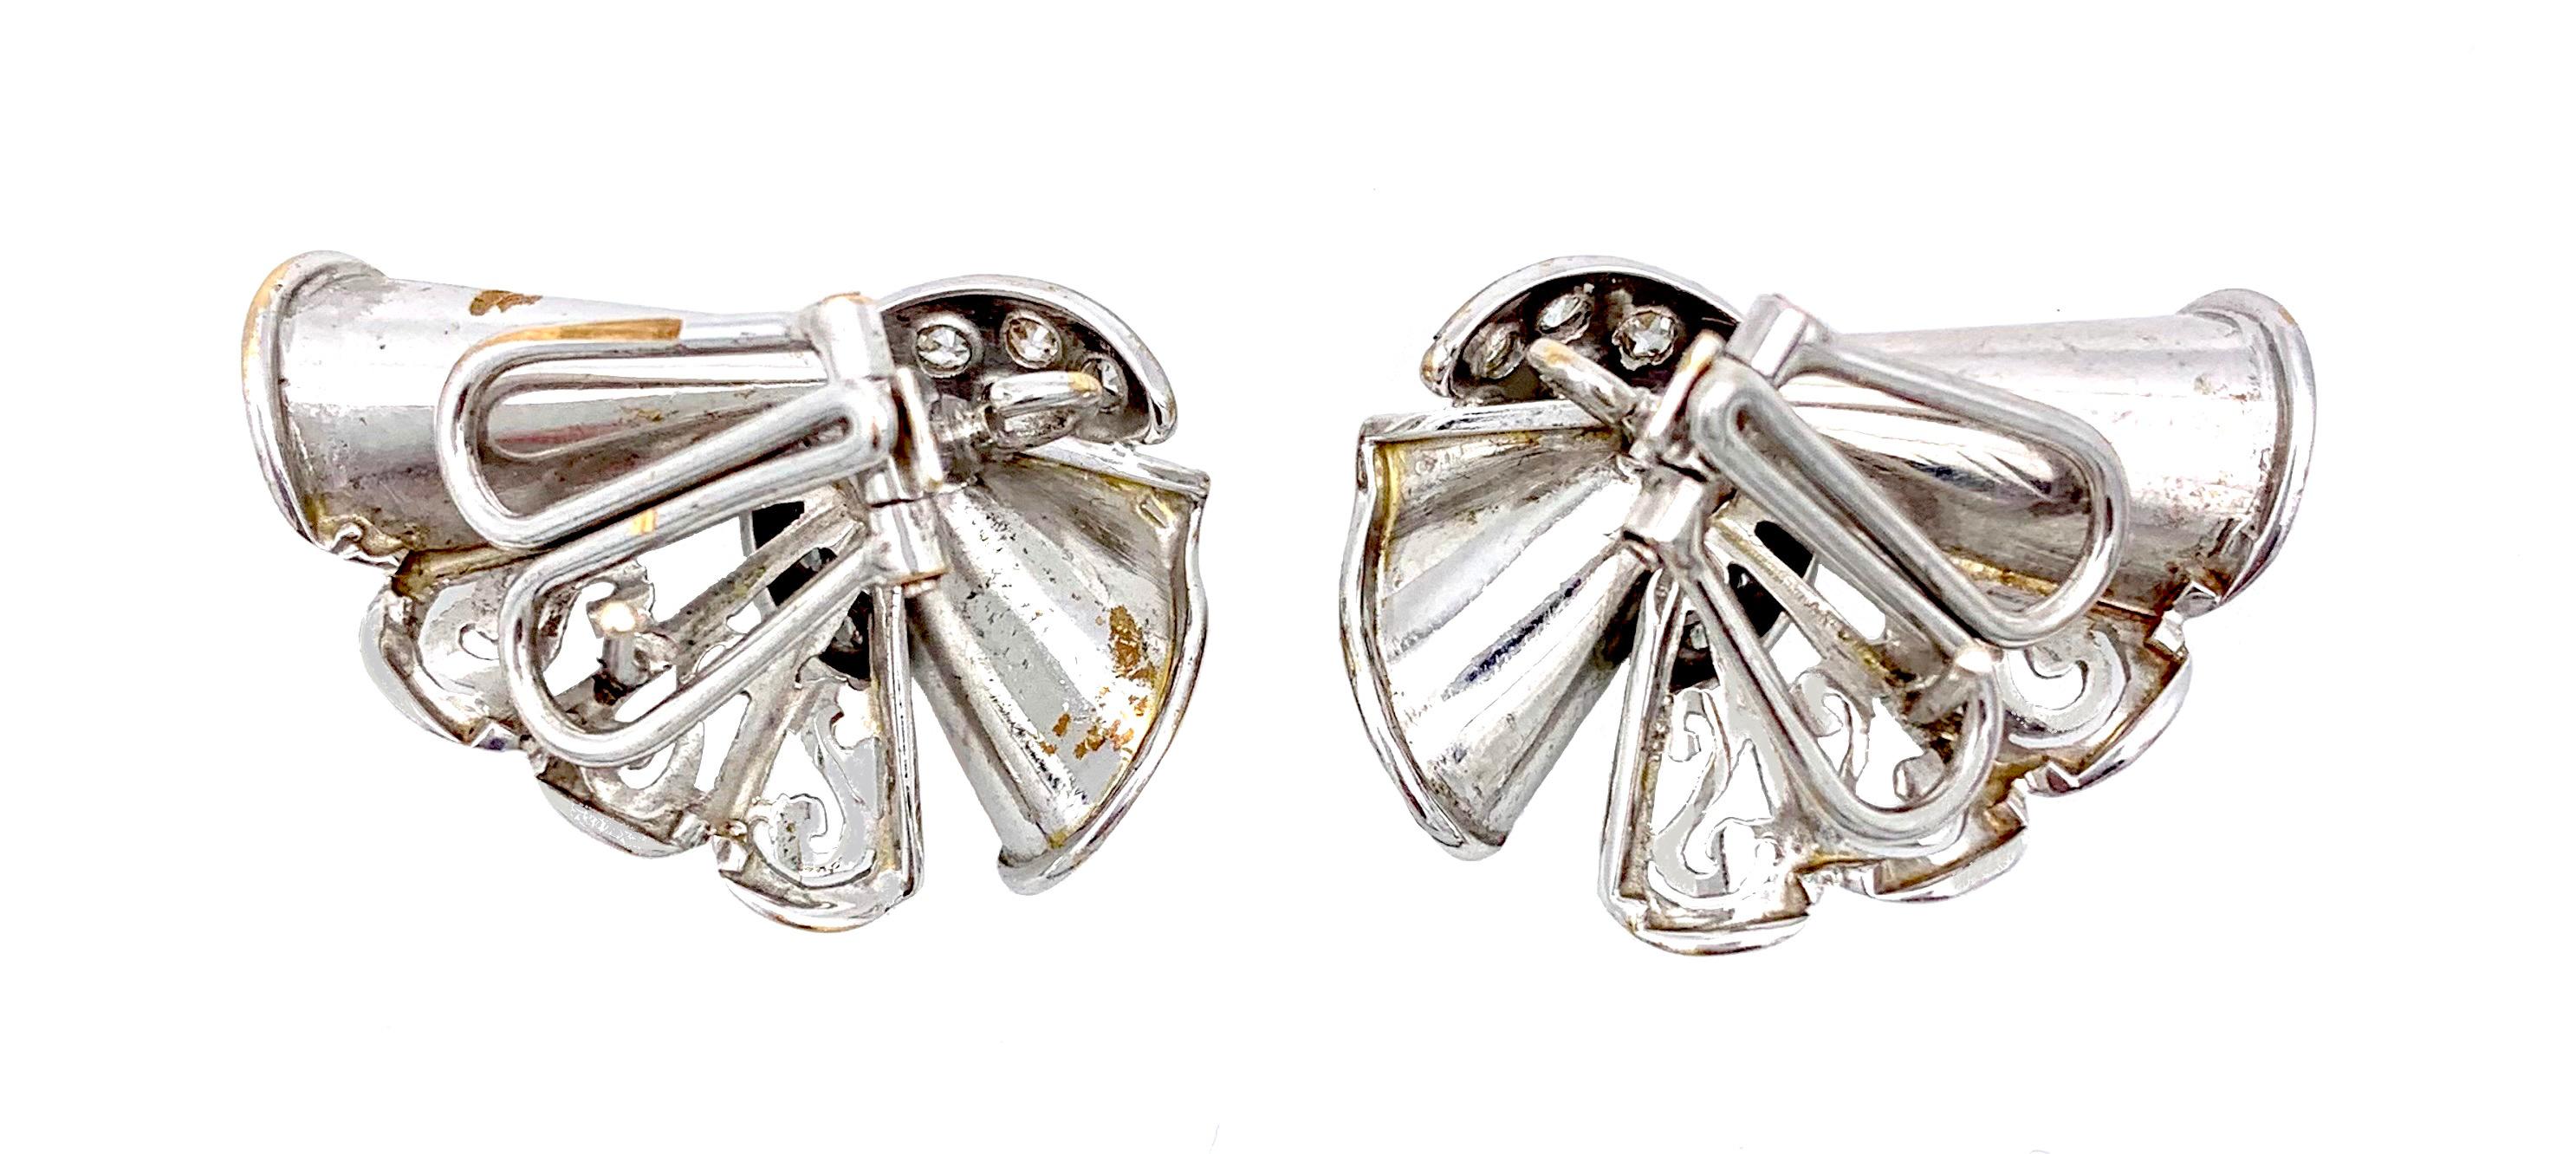 These Art Deco Clip-on Earrings were made out of 14 Karat gold and have then been rhodium plated. The design shows scrolls with pierced  elements reminiscent of lace. The gold fabric is held together by a crescent shaped element set with brilliant